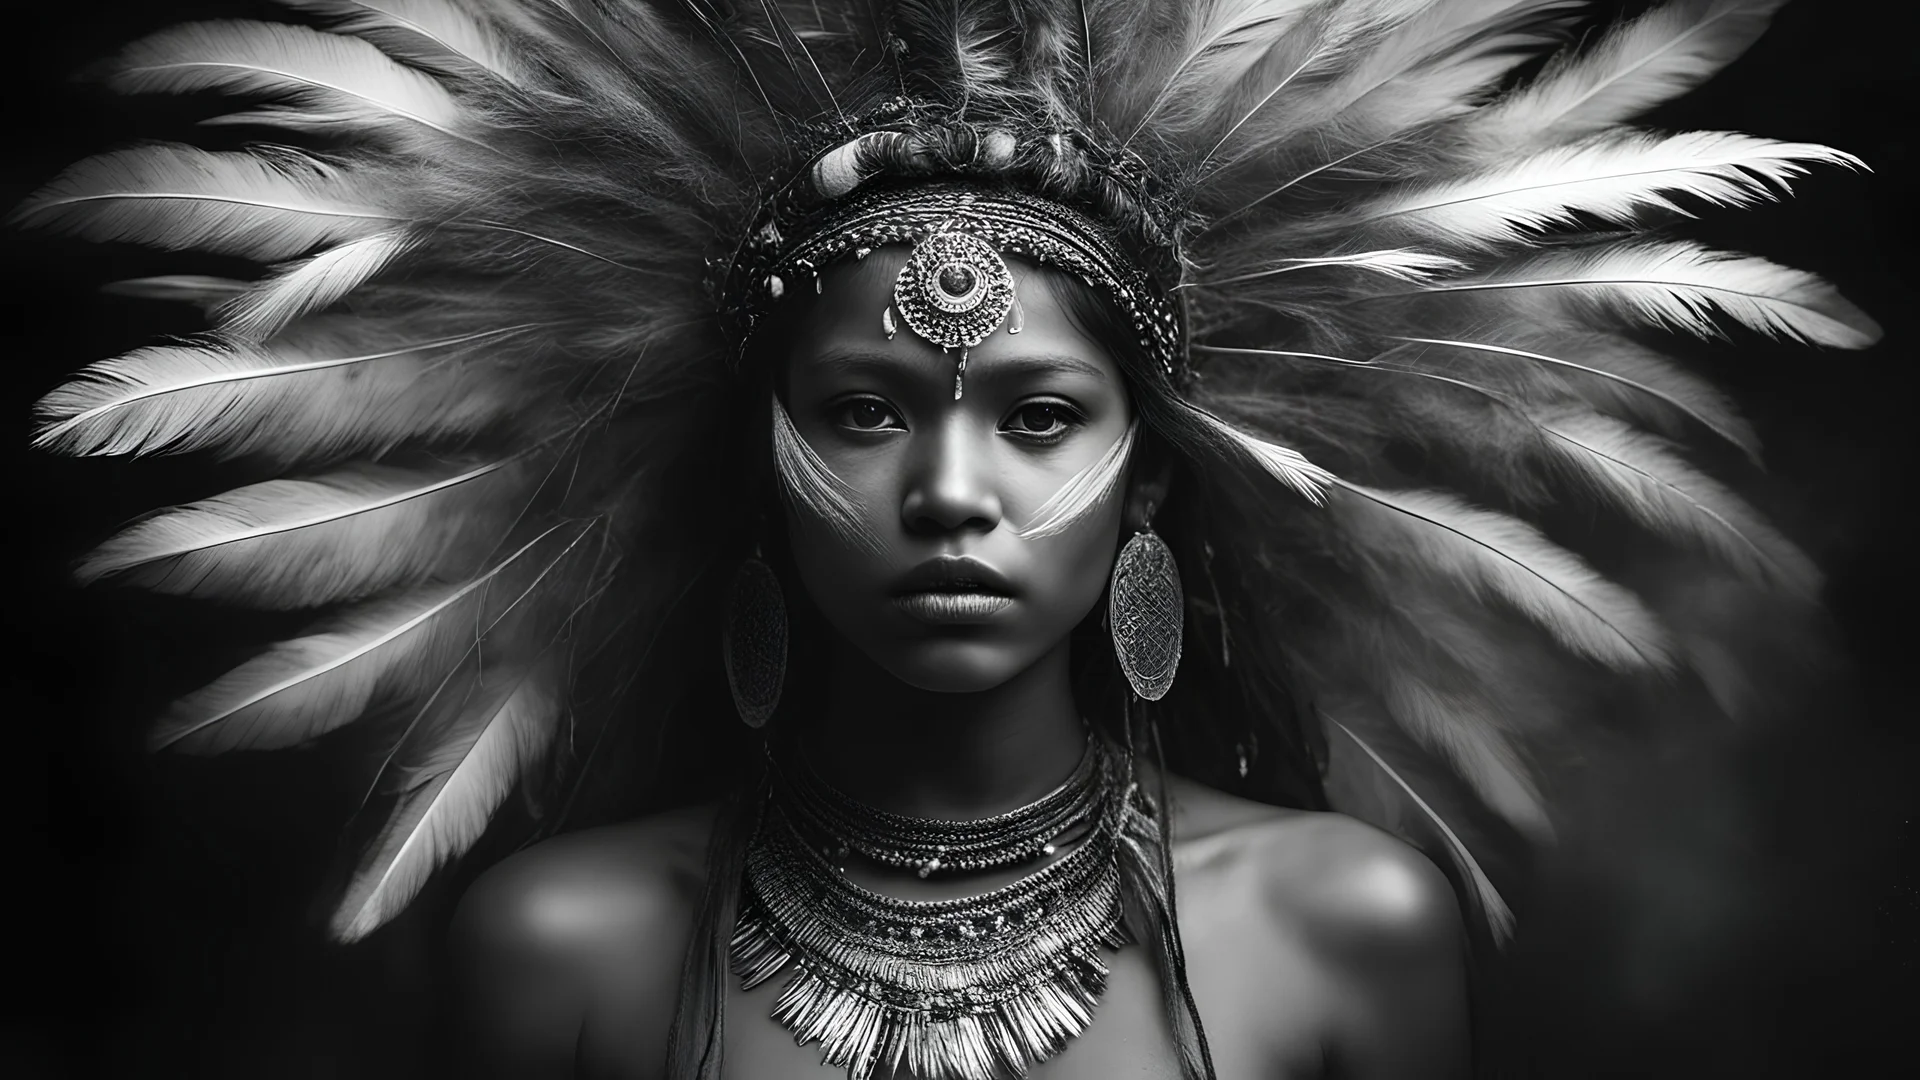 Photoreal unearthly gorgeous indigenous godlike mayan girl adorned in clothes adorned with feathers that flutter with every step exuding beauty and hair cascading down her back like a waterfall of obsidian and eyes holding a spark of wild intelligence on an old ship shrouded in extreme pitch black darkness by lee jeffries, otherworldly creature, in the style of fantasy movies, shot on Hasselblad h6d-400c, zeiss prime lens, bokeh like f/0.8, tilt-shift lens